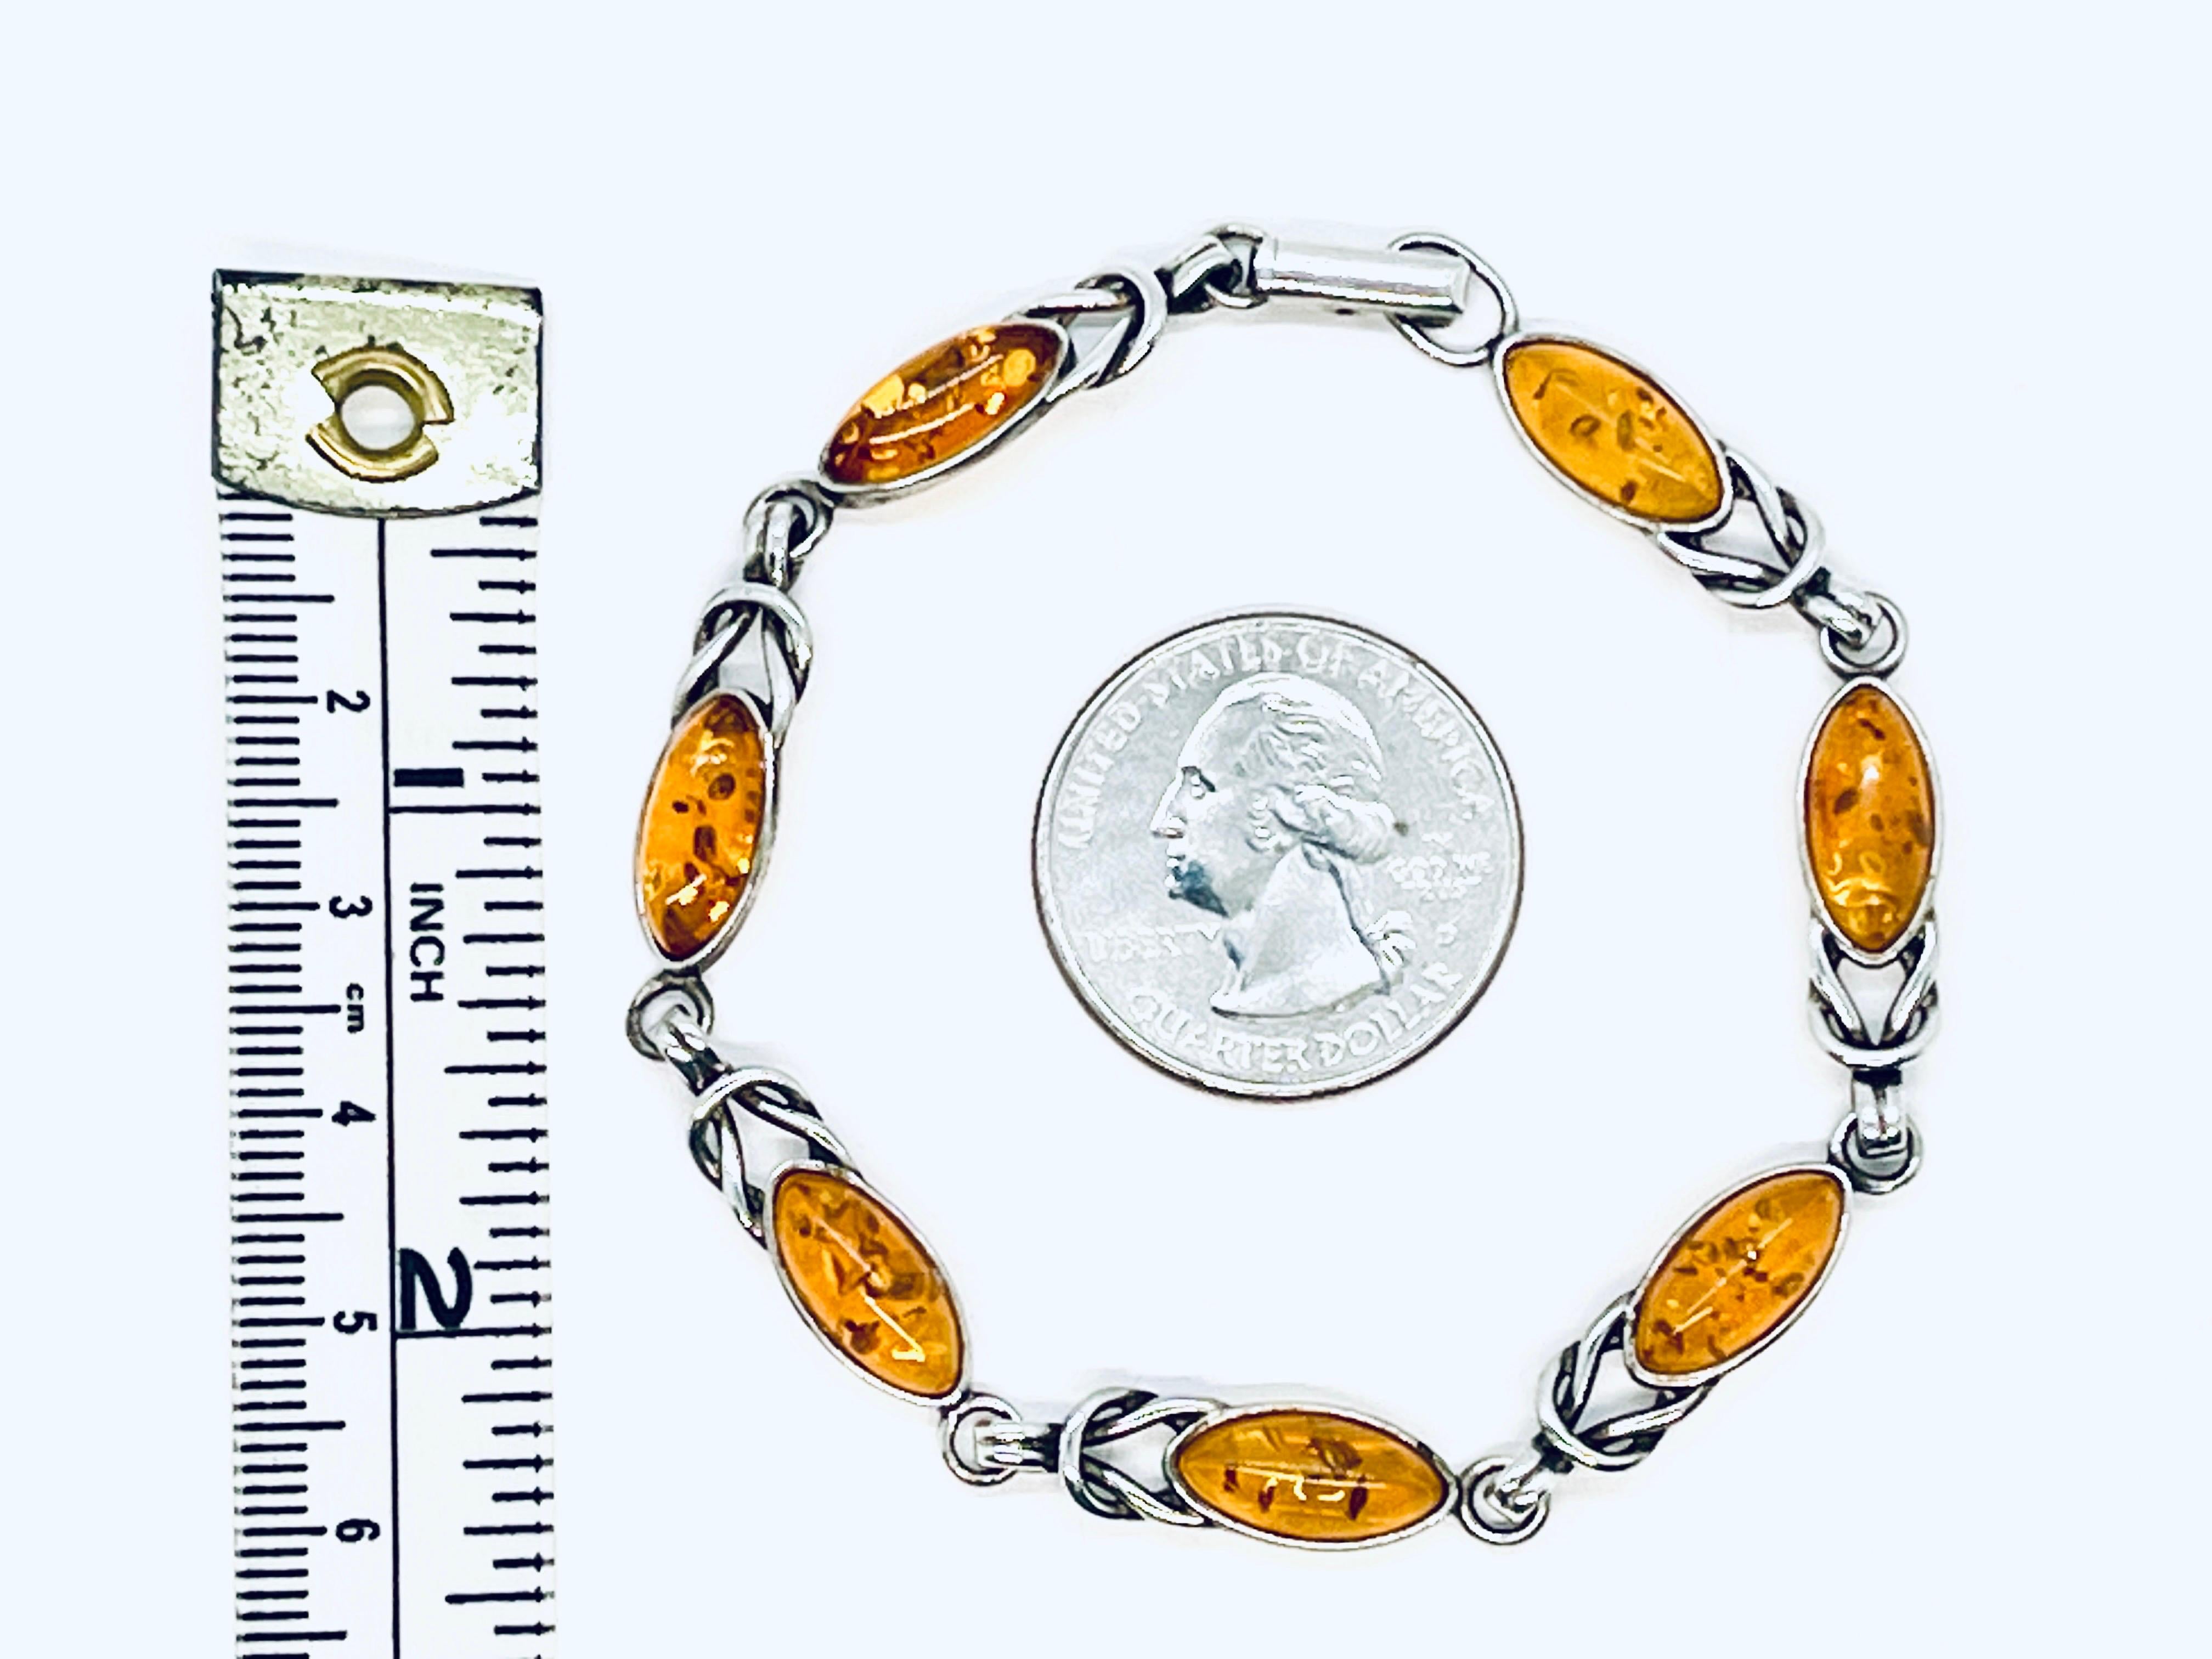 7 Baltic Amber Marquise Cabochons on Sterling Silver (marked) link bracelet, with faux knot details. Hinged clasp. Two marks: One only visible under magnifying glass on the silver under one of the amber cabochons near the clasp. The second mark is